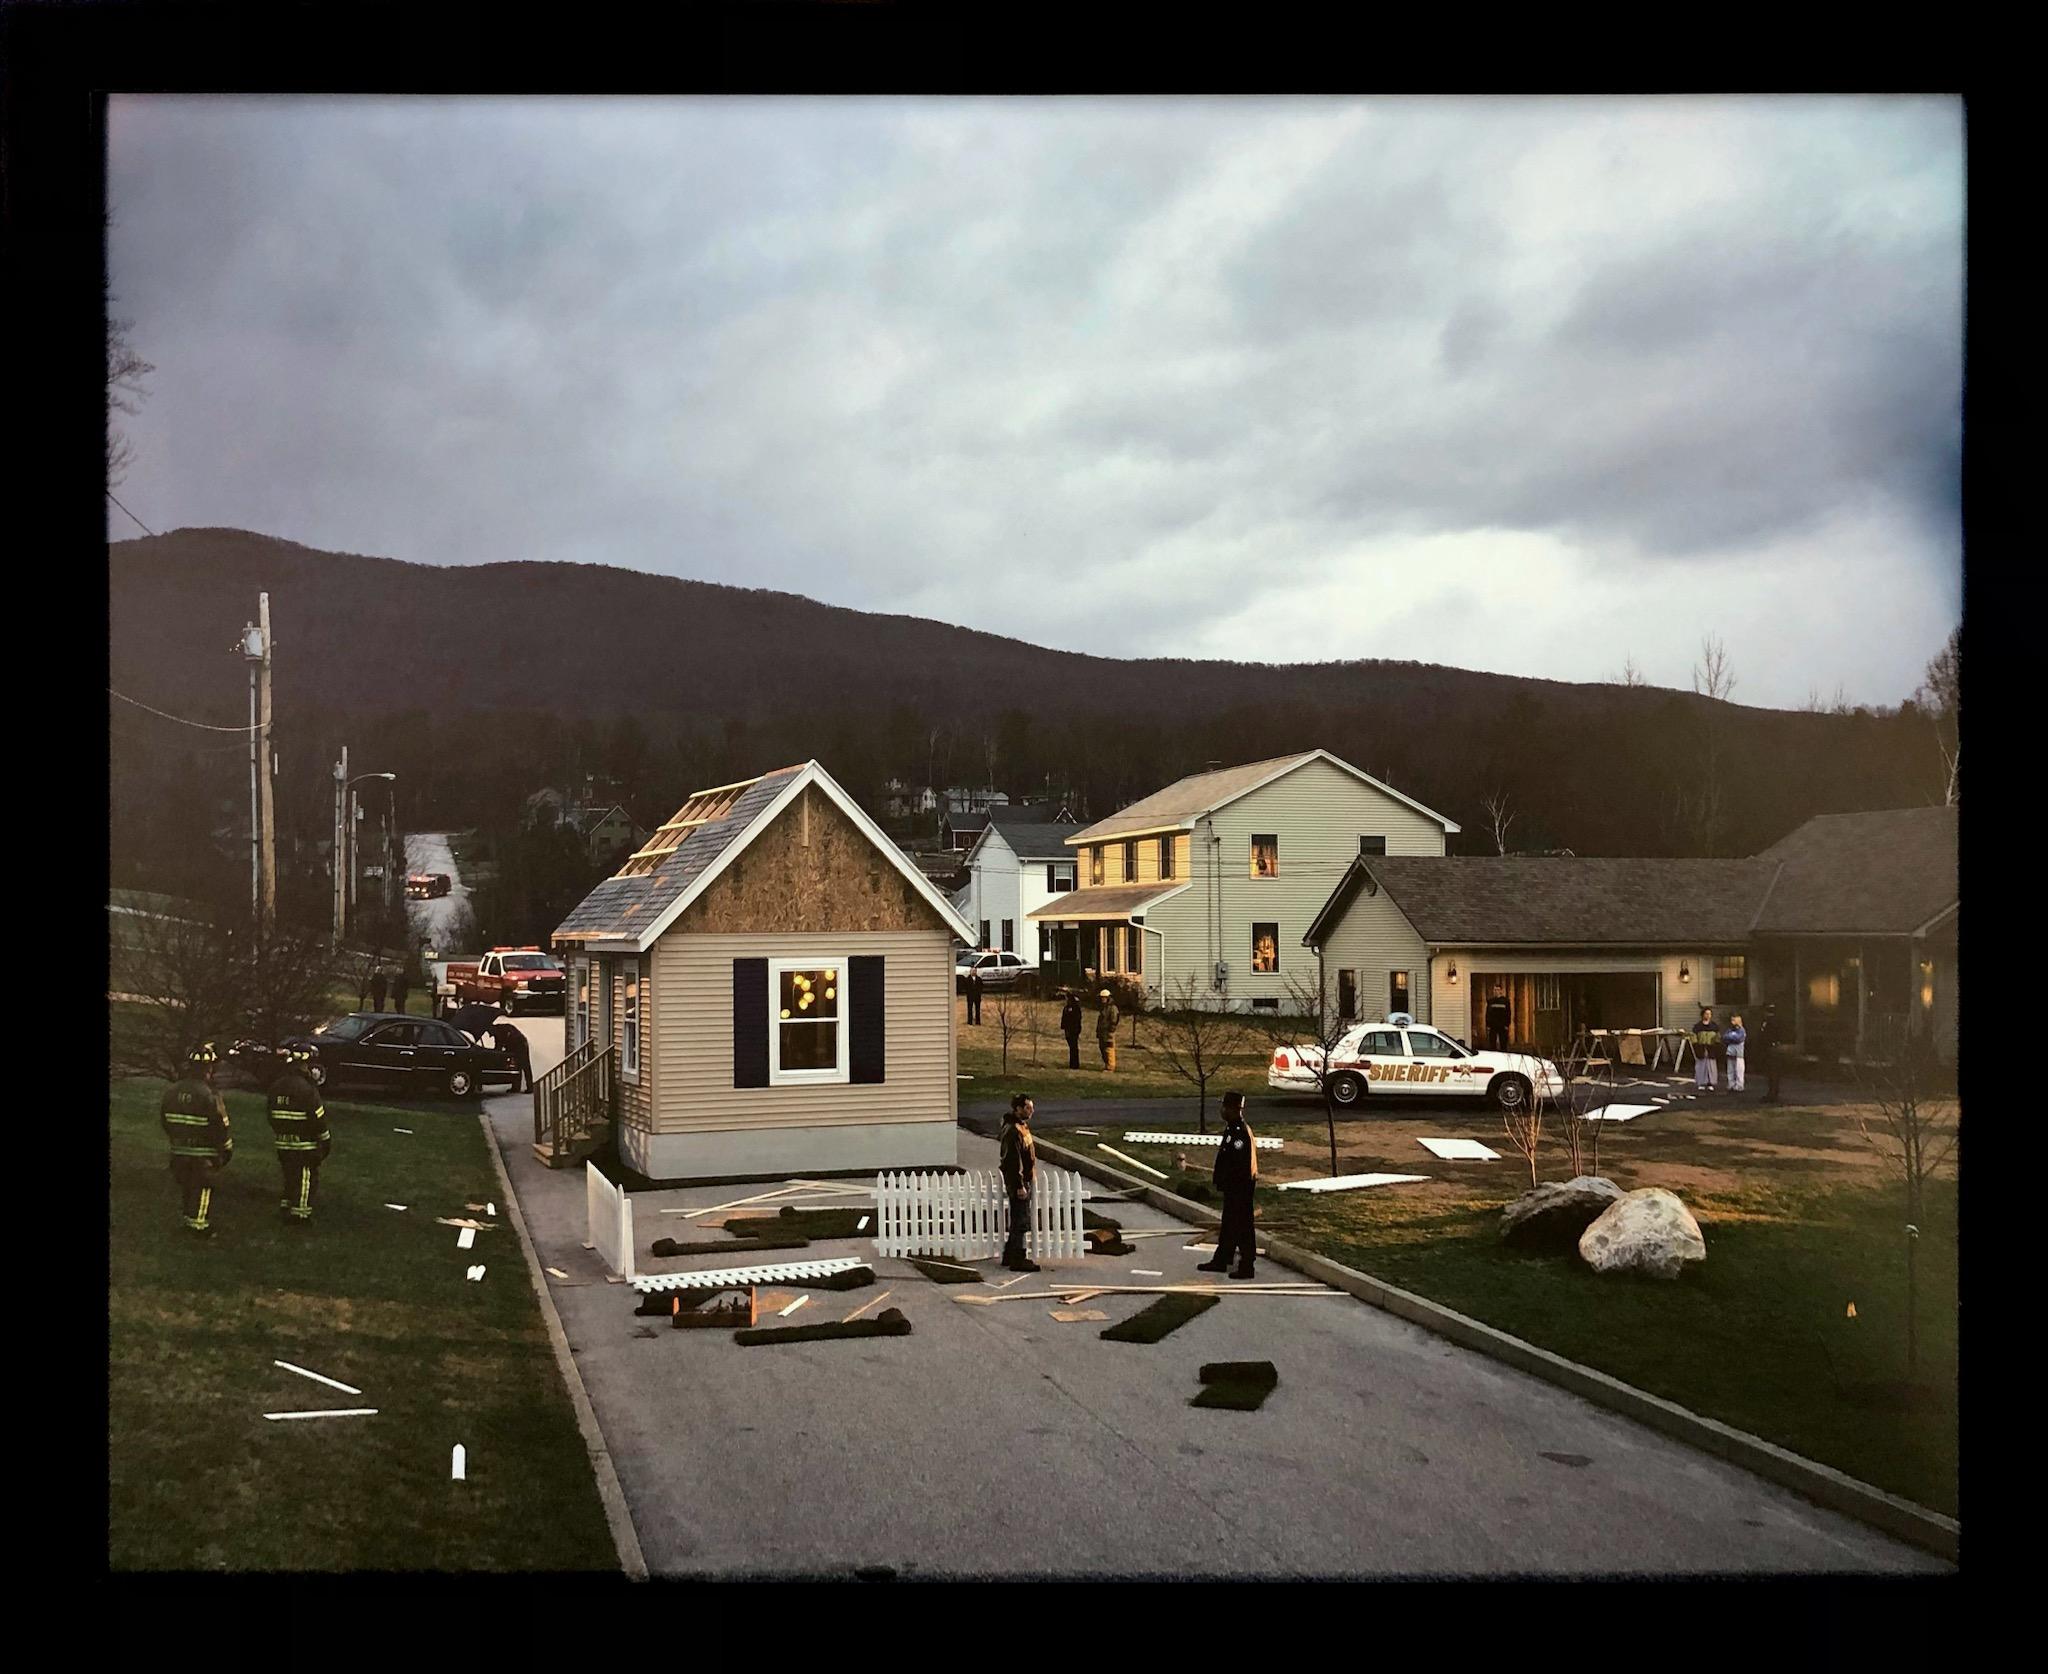 Gregory Crewdson Landscape Photograph - UNTITLED (HOUSE IN THE ROAD)